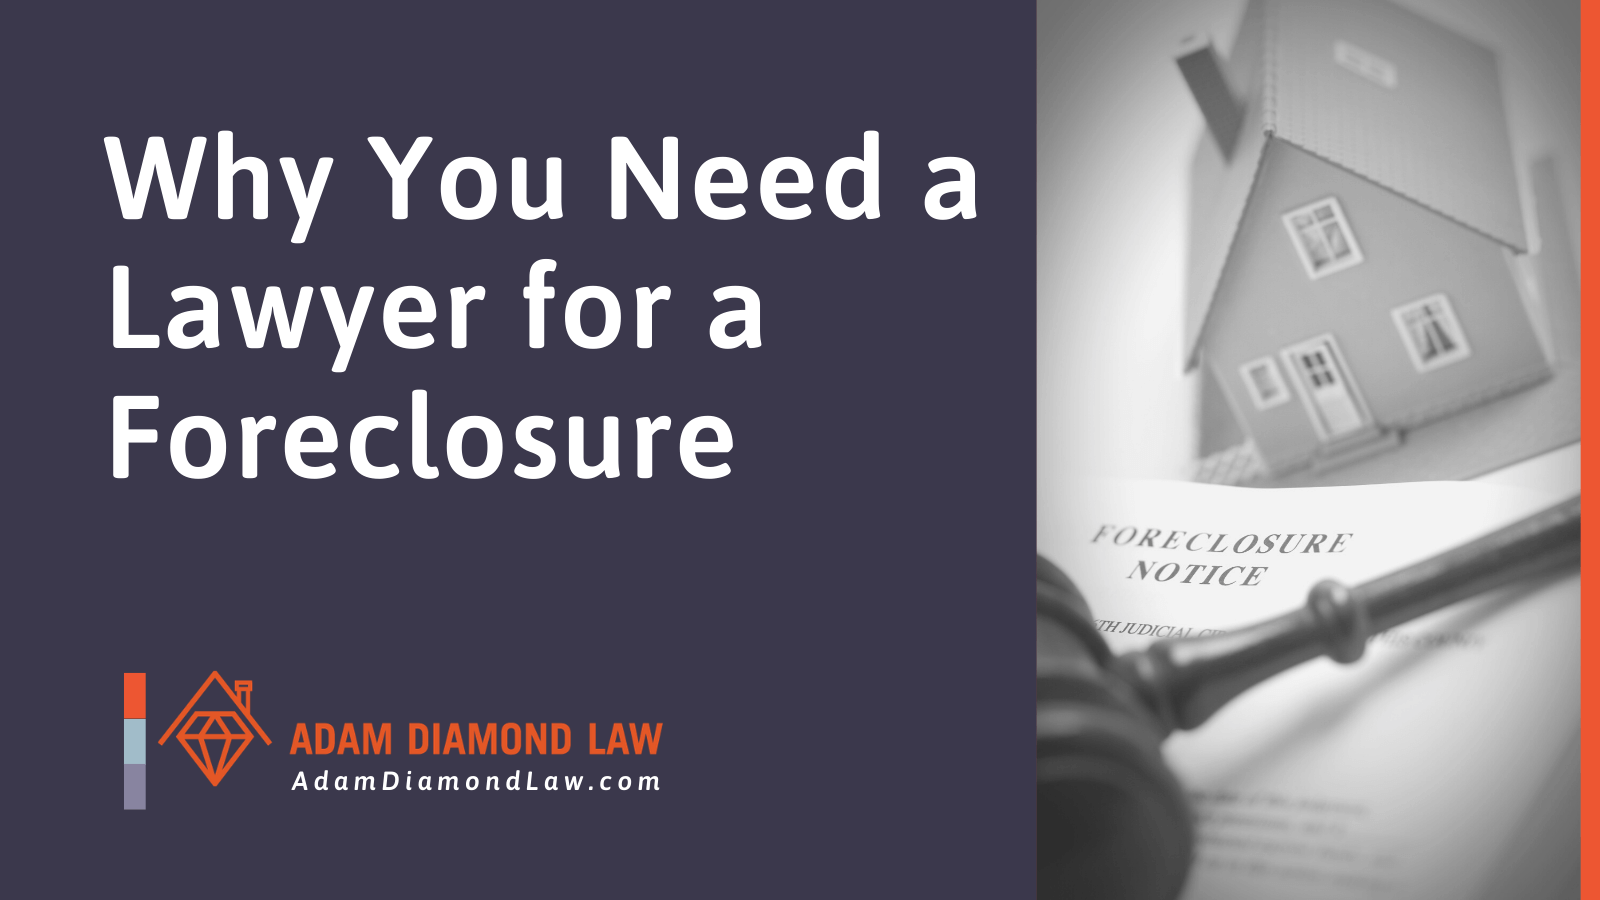 Why You Need a Lawyer for a Foreclosure - Adam Diamond Law | McHenry, IL Residential Real Estate Lawyer